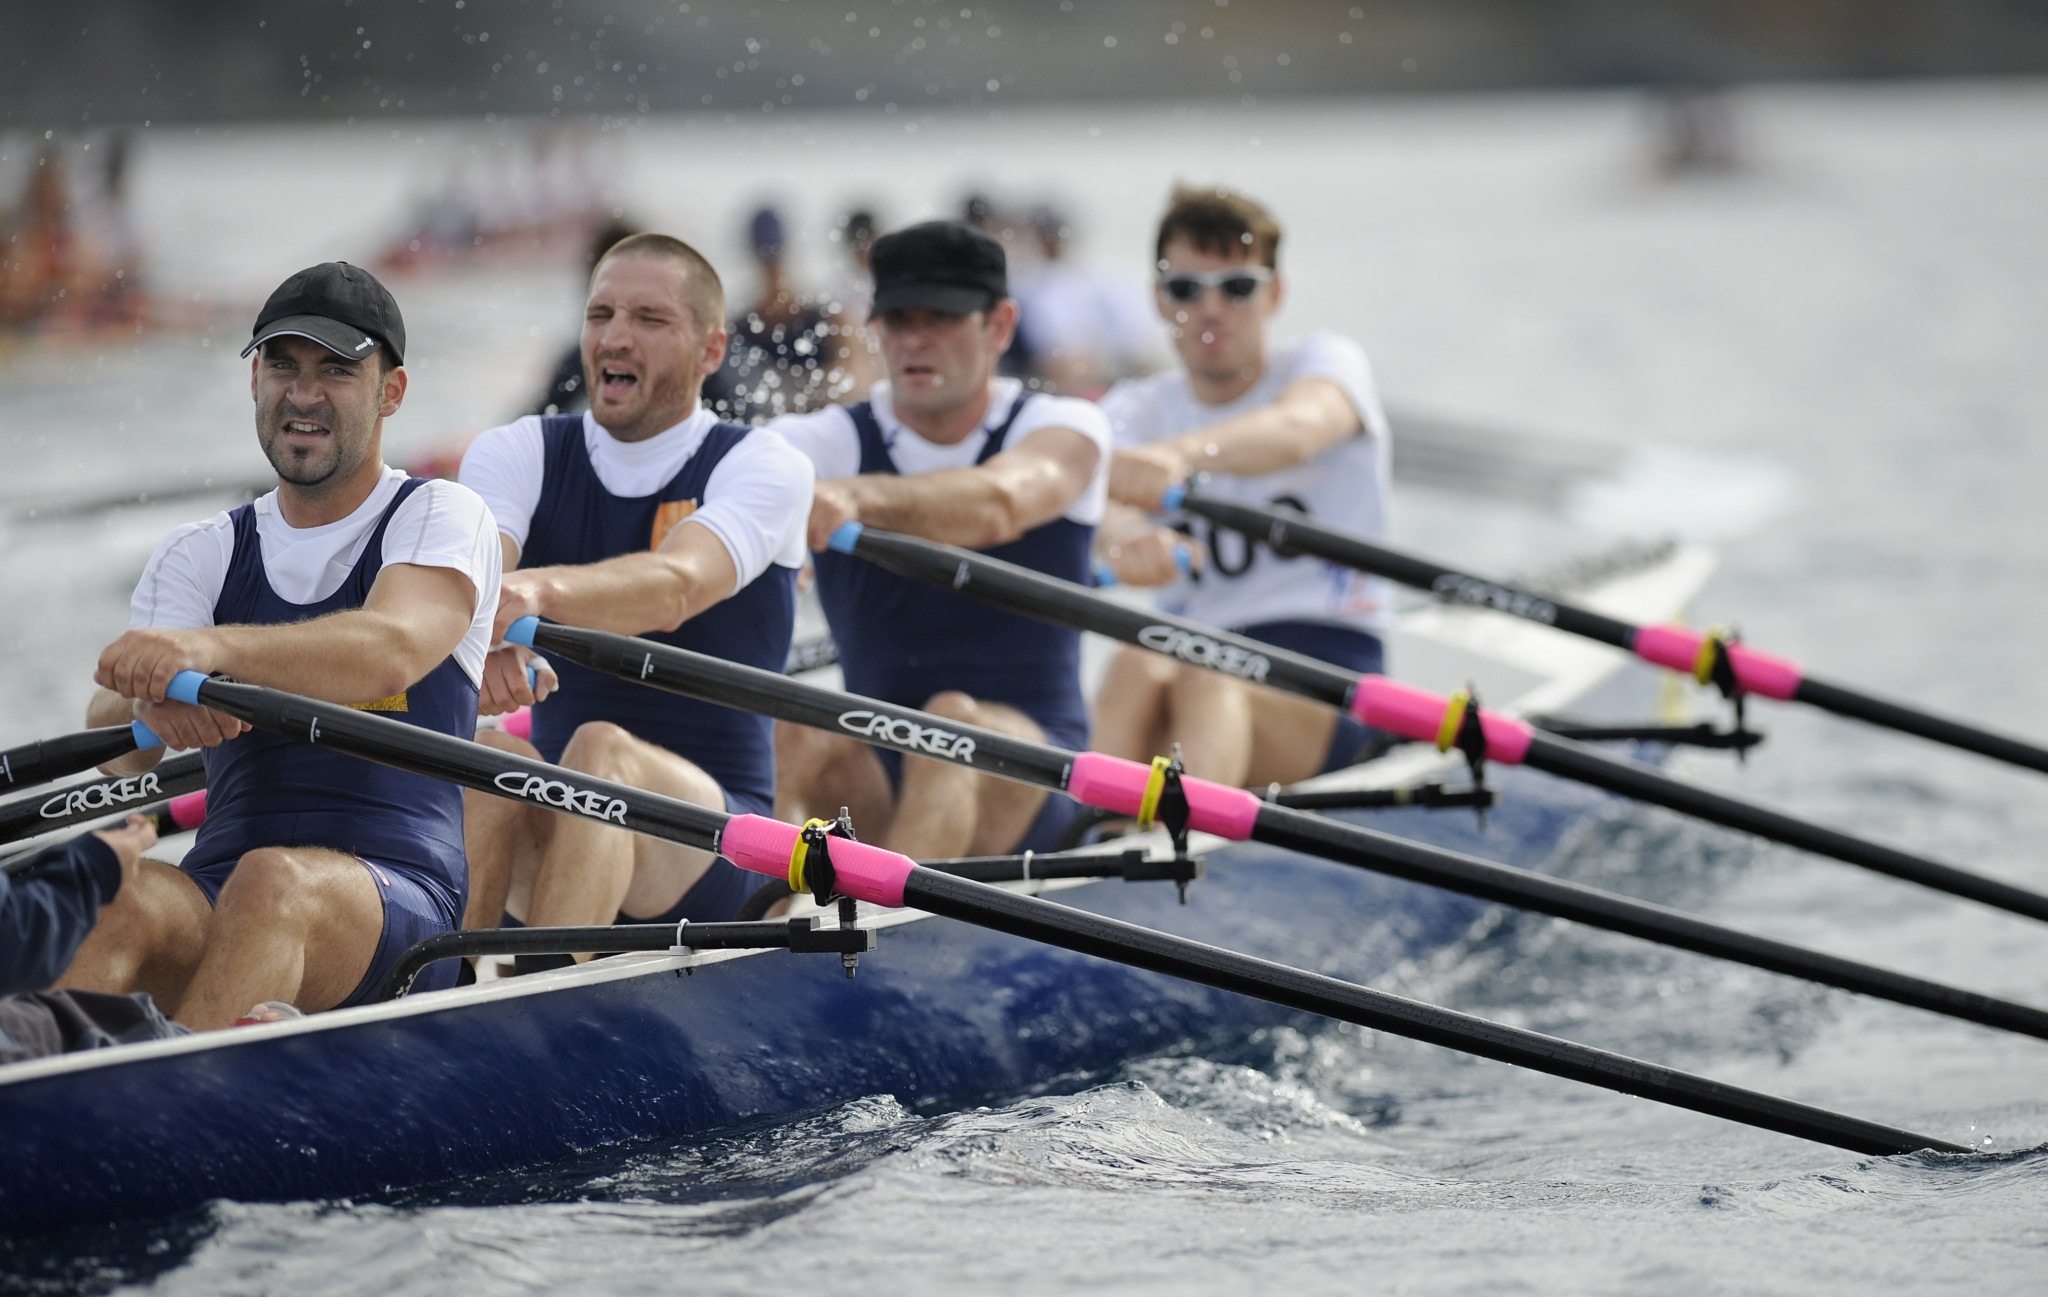 Italy set to host European Rowing Coastal Challenge in October